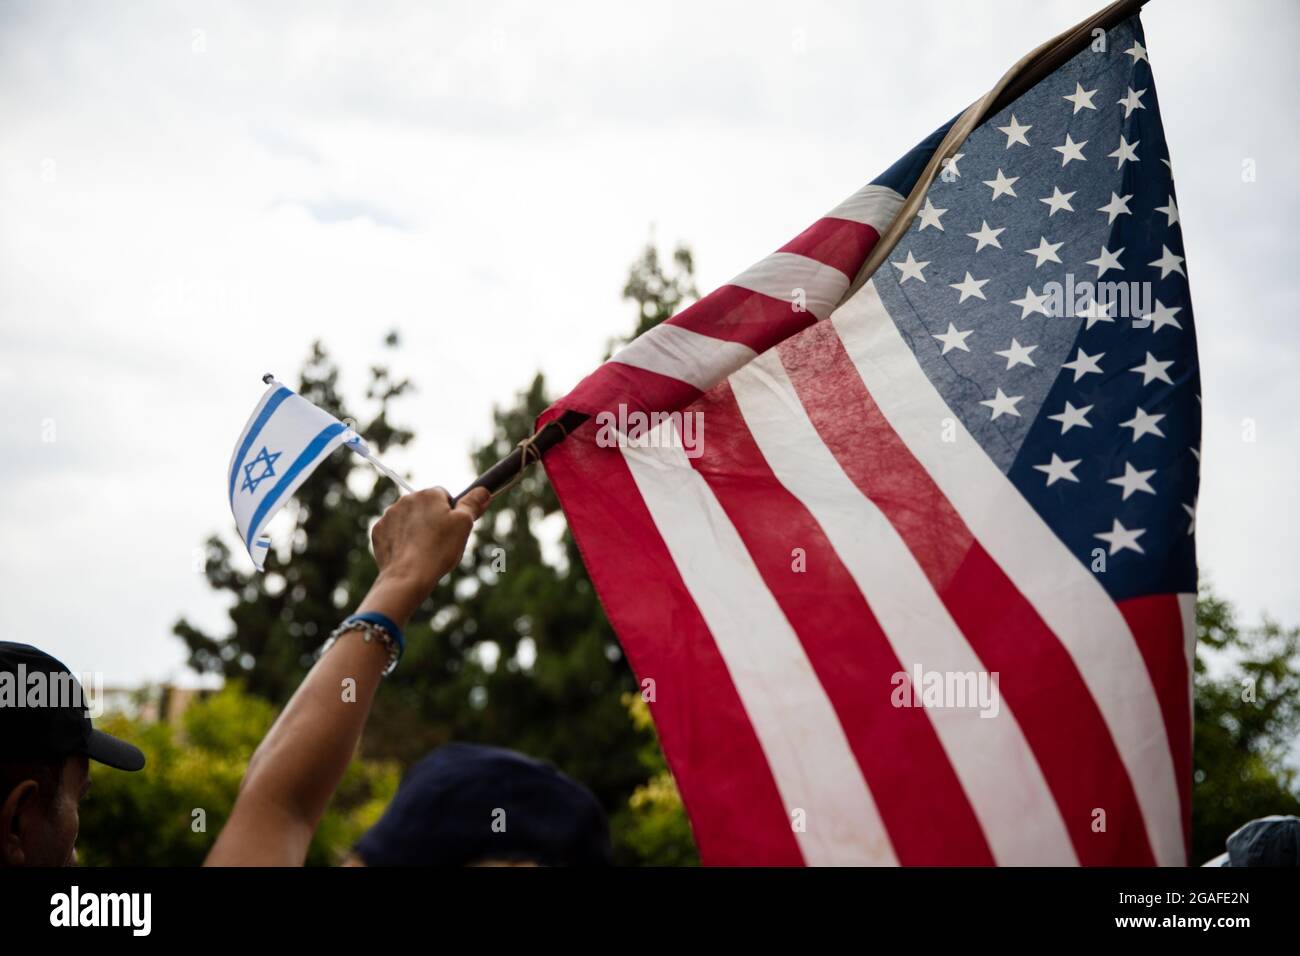 USA. 25th July, 2021. An attendee holds up an American flag and Israel flag during the “We Are Israel” rally in El Cajon, CA on Sunday, July 25, 2021. The rally, according to non-profit Shield of David, was created to “rally with Jews and Christians who boldly reject anti-Semitism and support Judeo-Christian values.” (Photo by Kristian Carreon/Sipa USA) Credit: Sipa USA/Alamy Live News Stock Photo